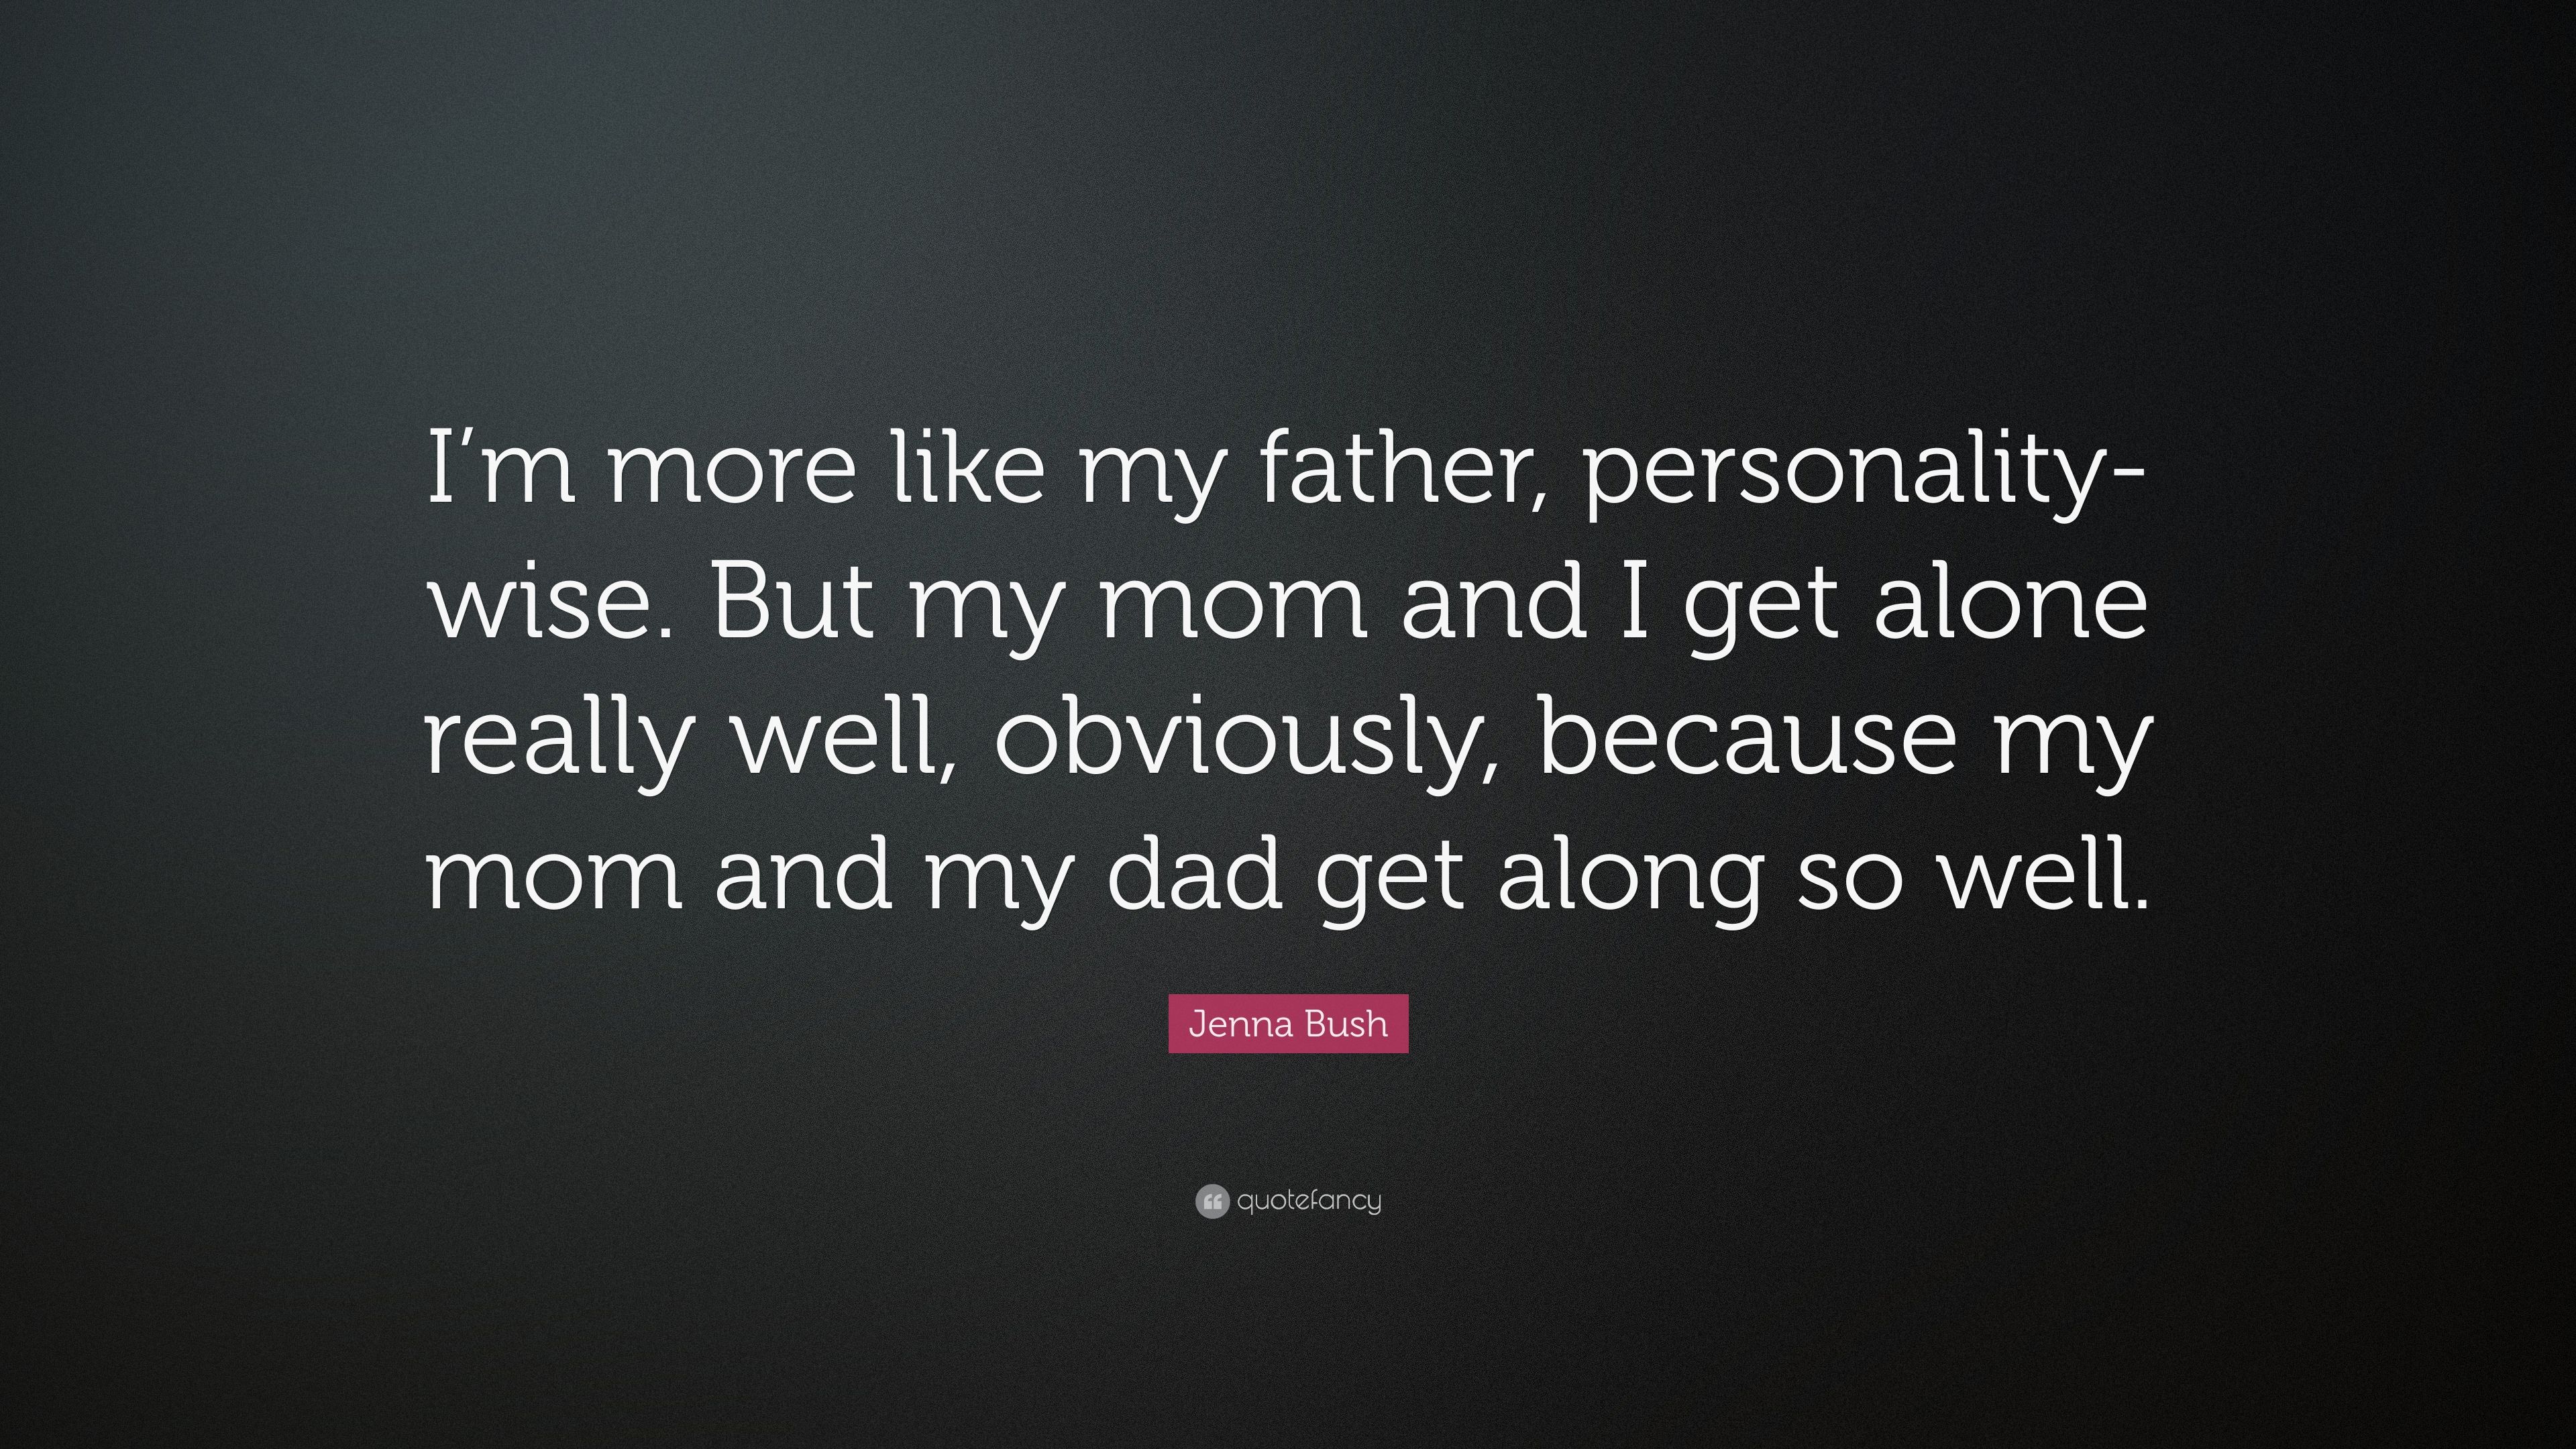 Jenna Bush Quote: “I'm More Like My Father, Personality Wise